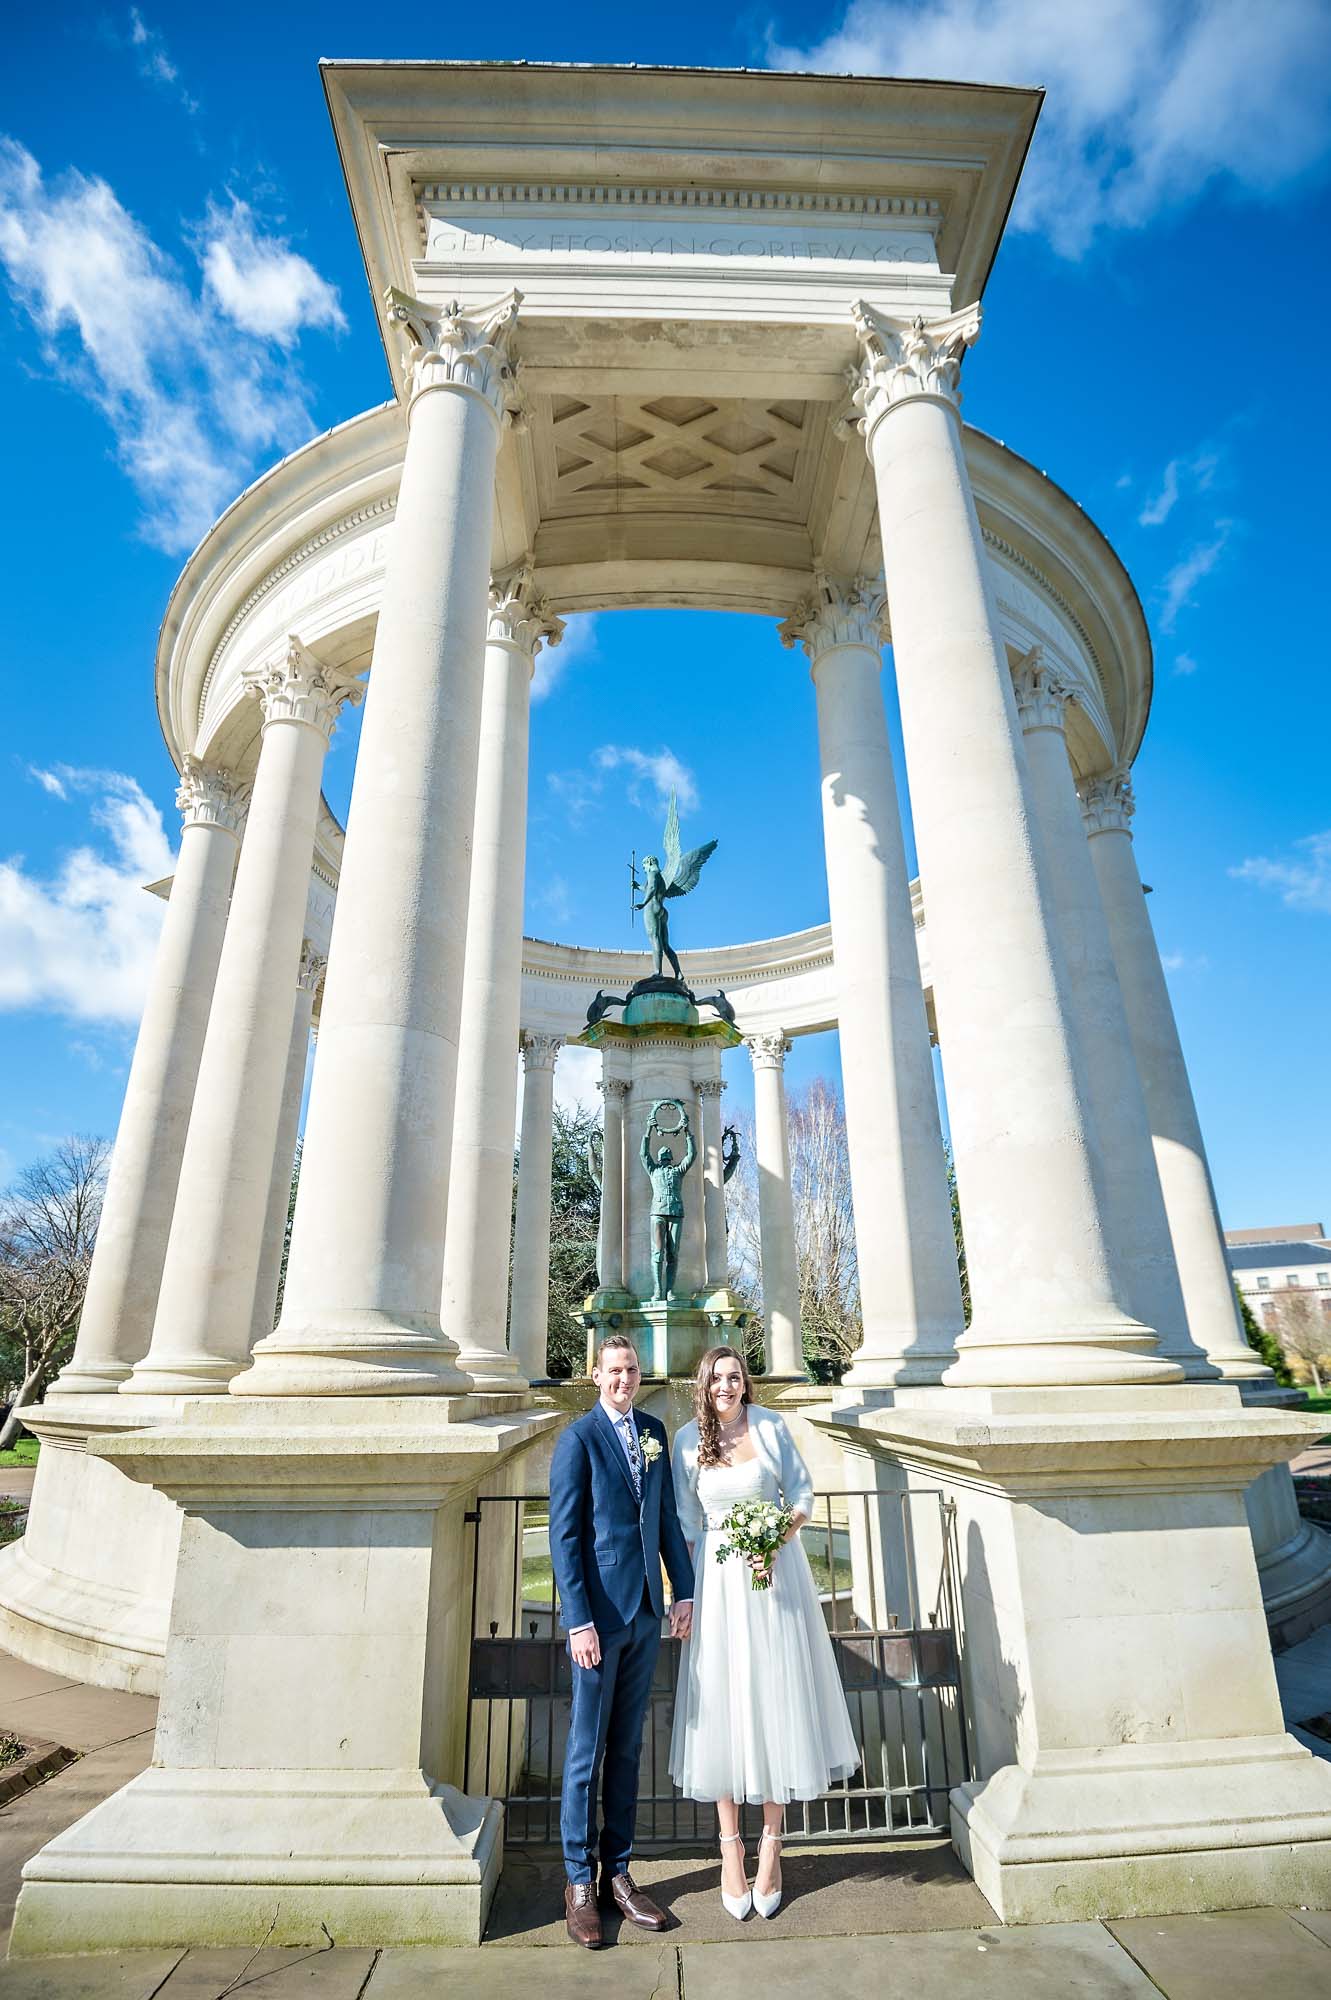 Bride and groom posing in front of the Alexandra Gardens memorial in Cardiff